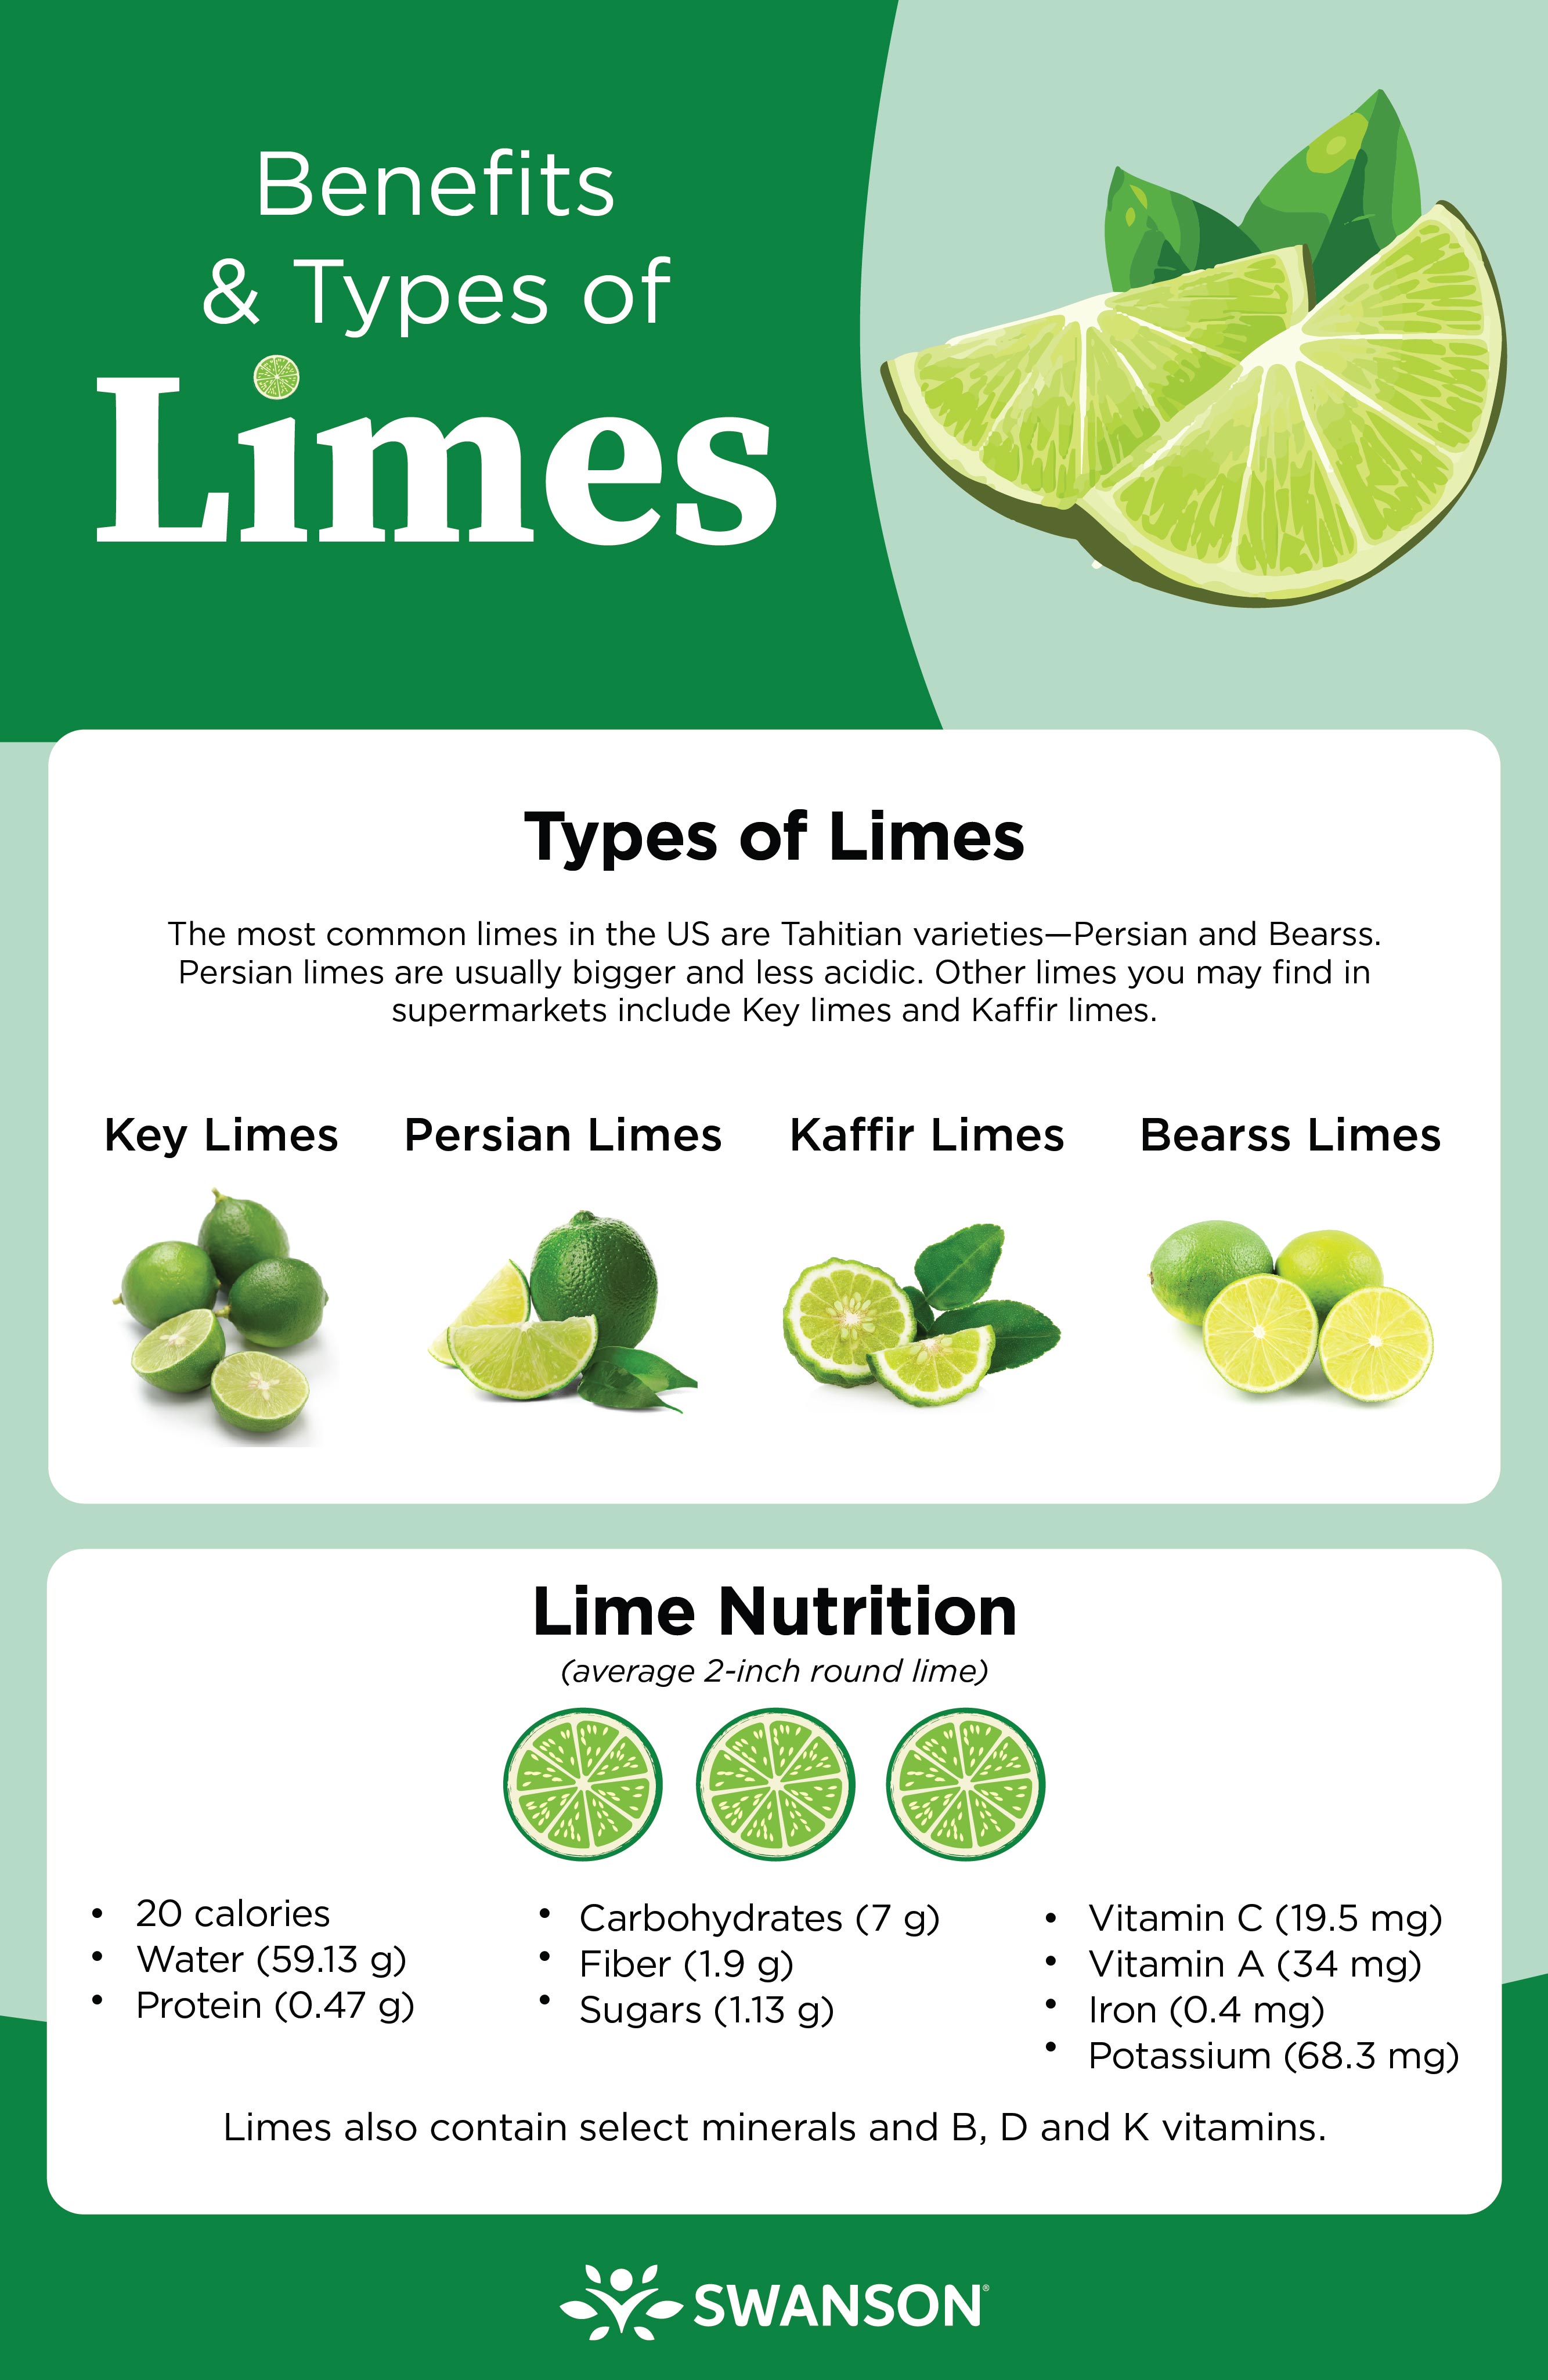 Health Benefits of Limes